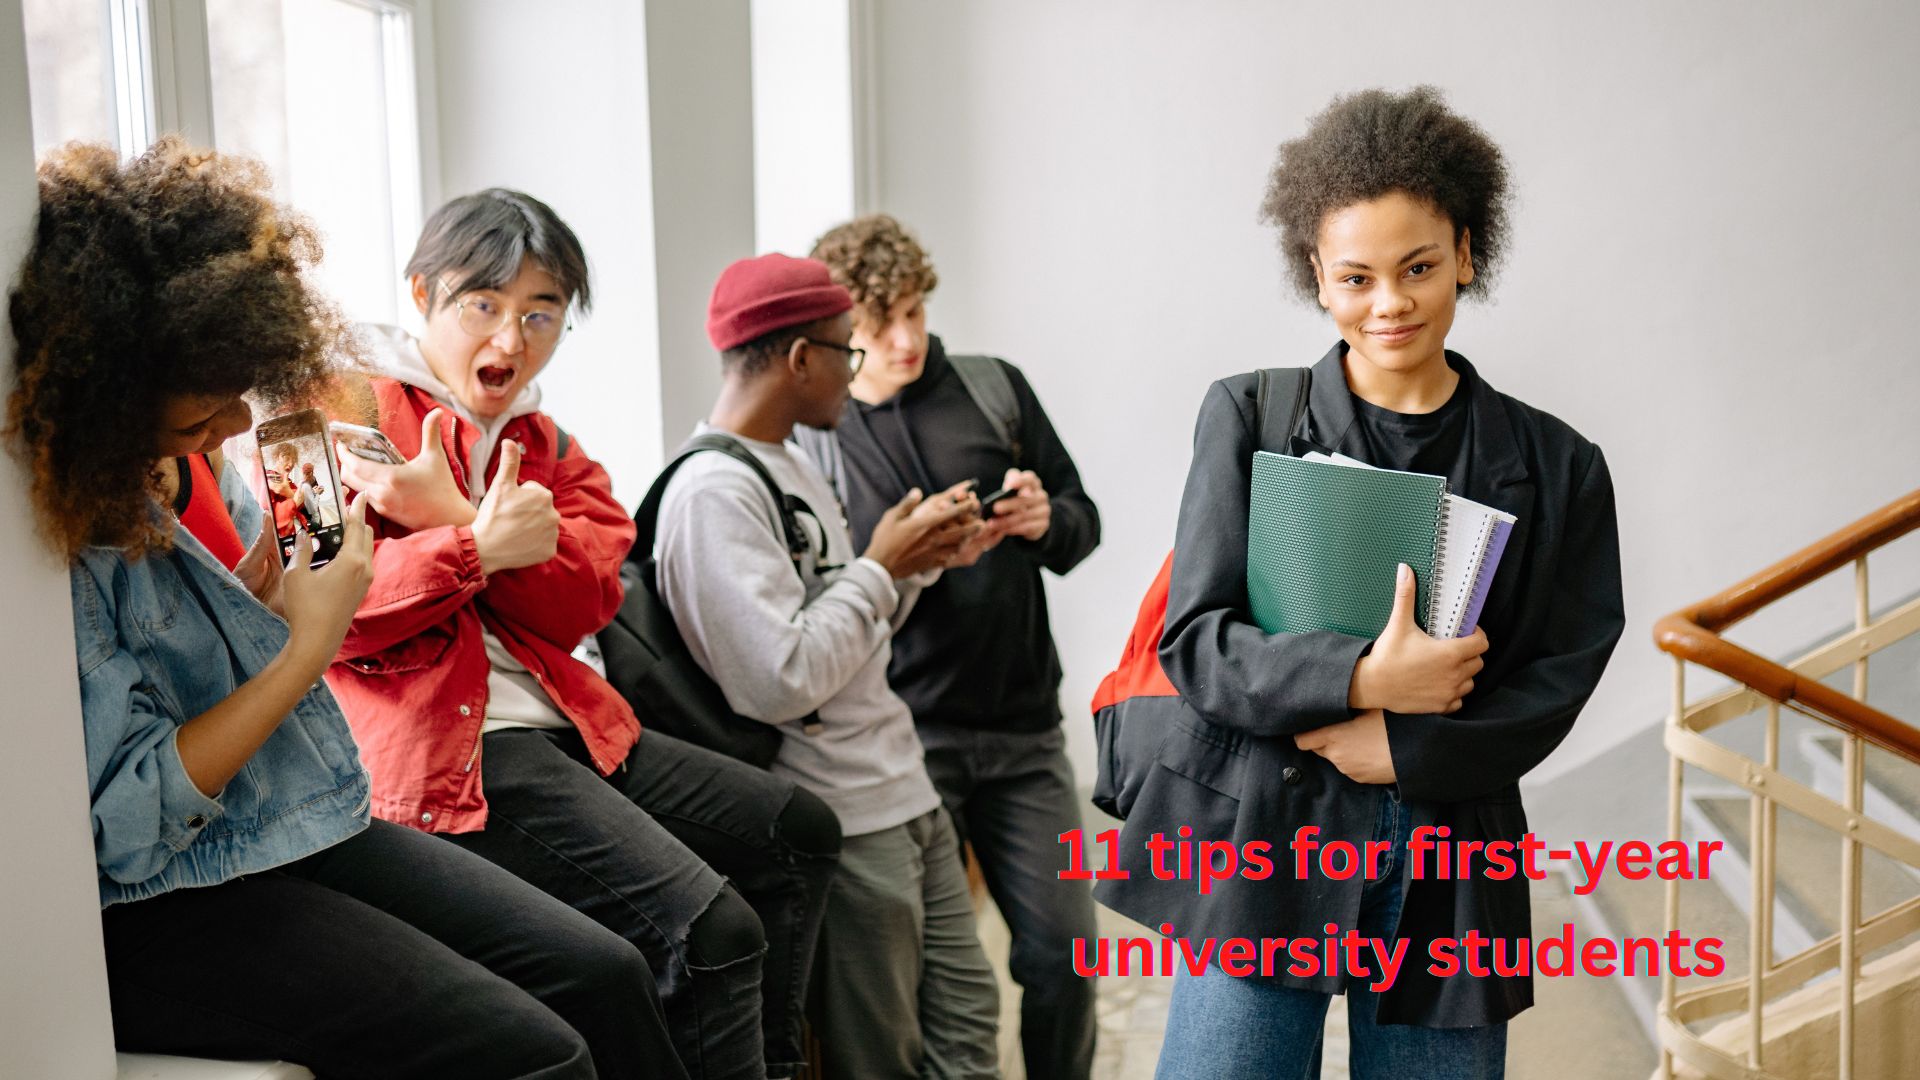 11 tips for first-year university students